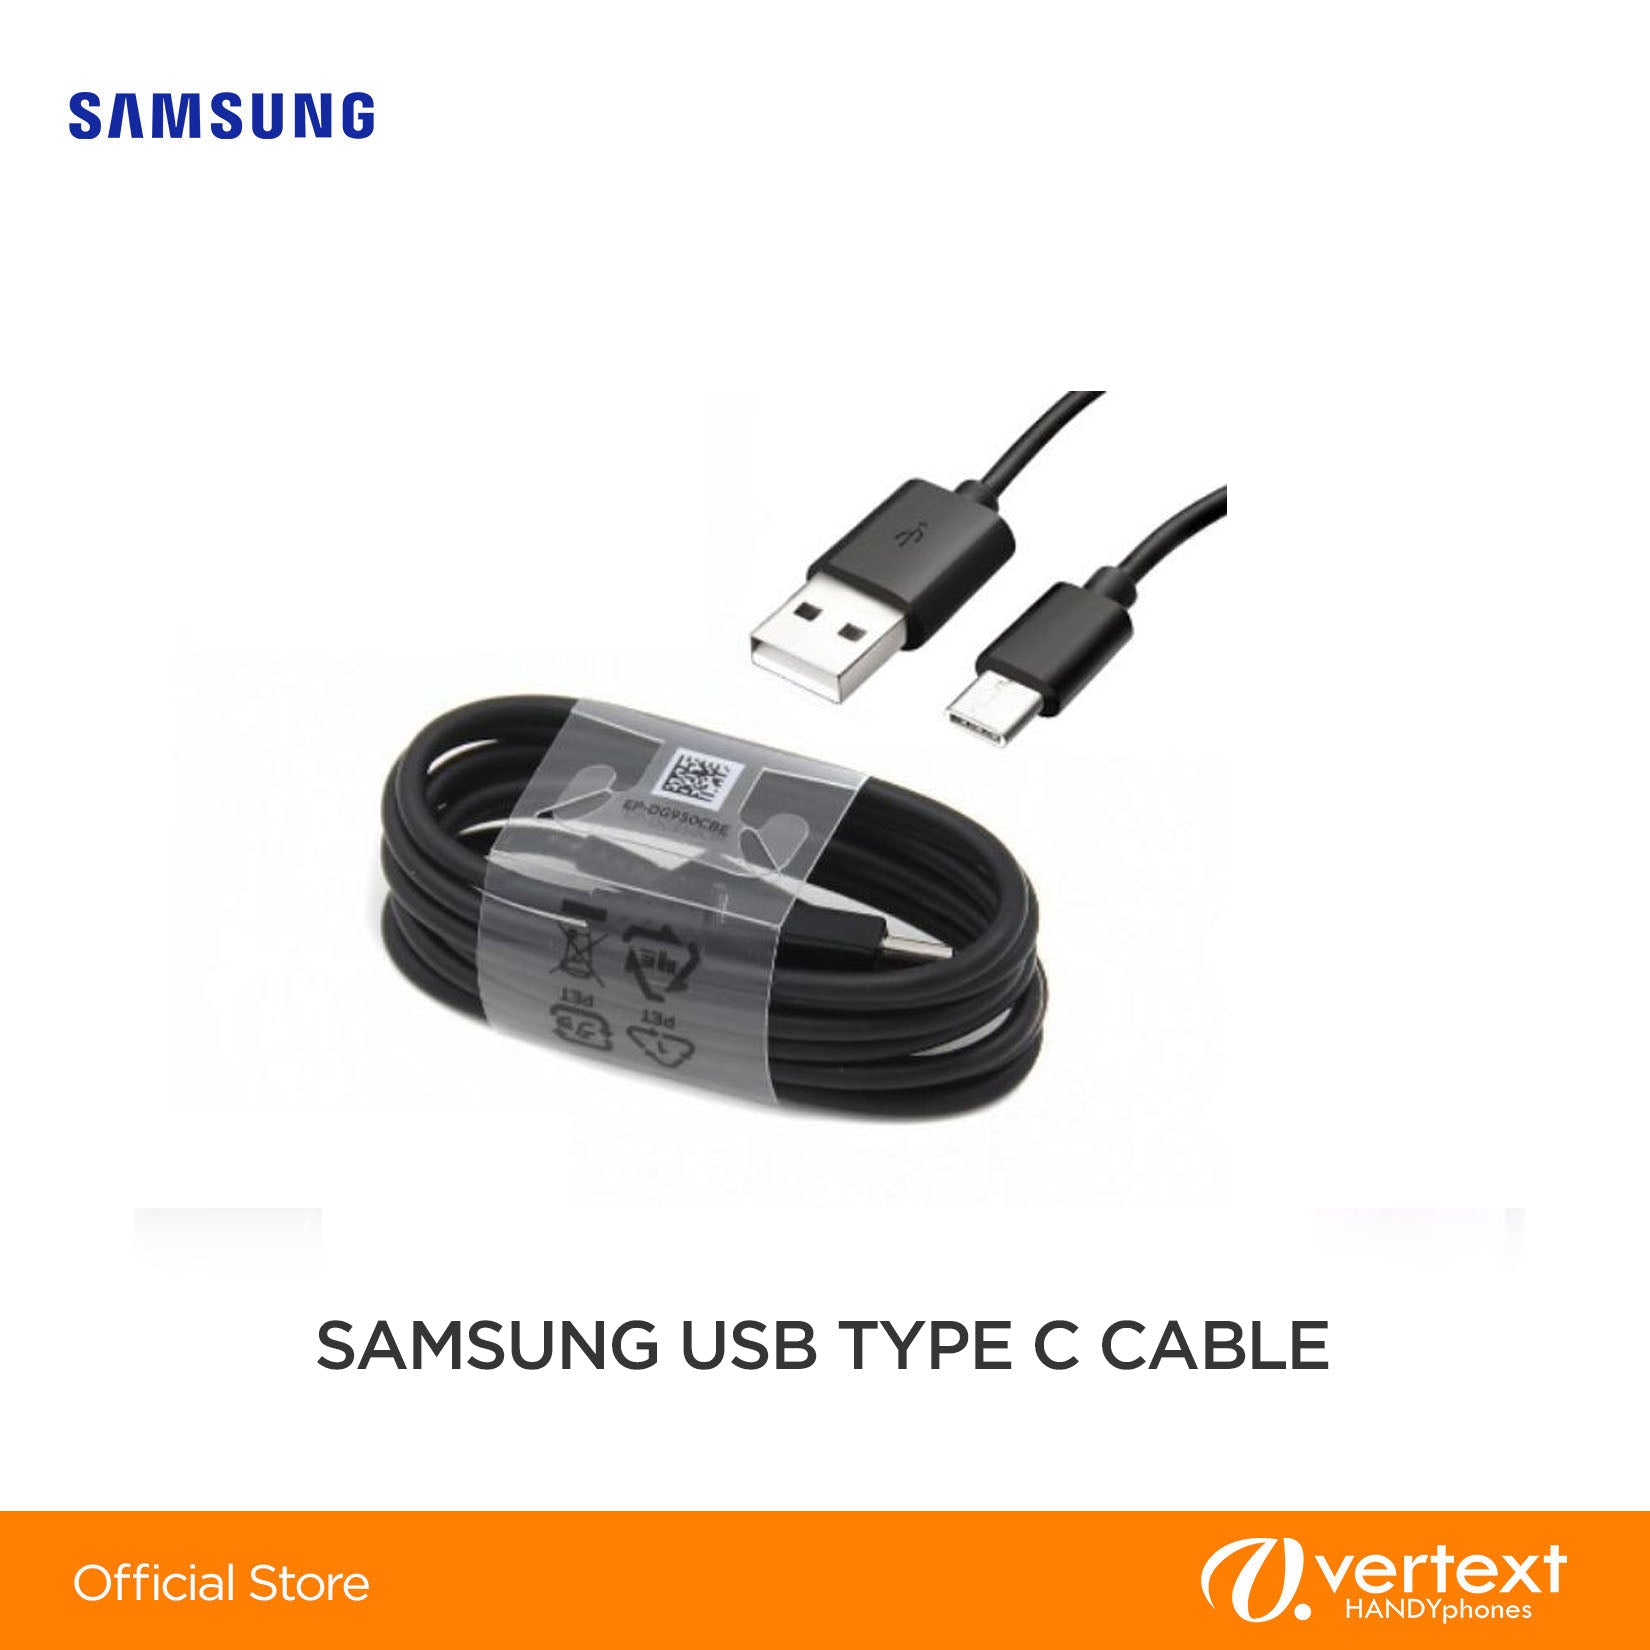 Samsung FAST CHARGING USB TYPE C TO TYPE C CABLE 3A